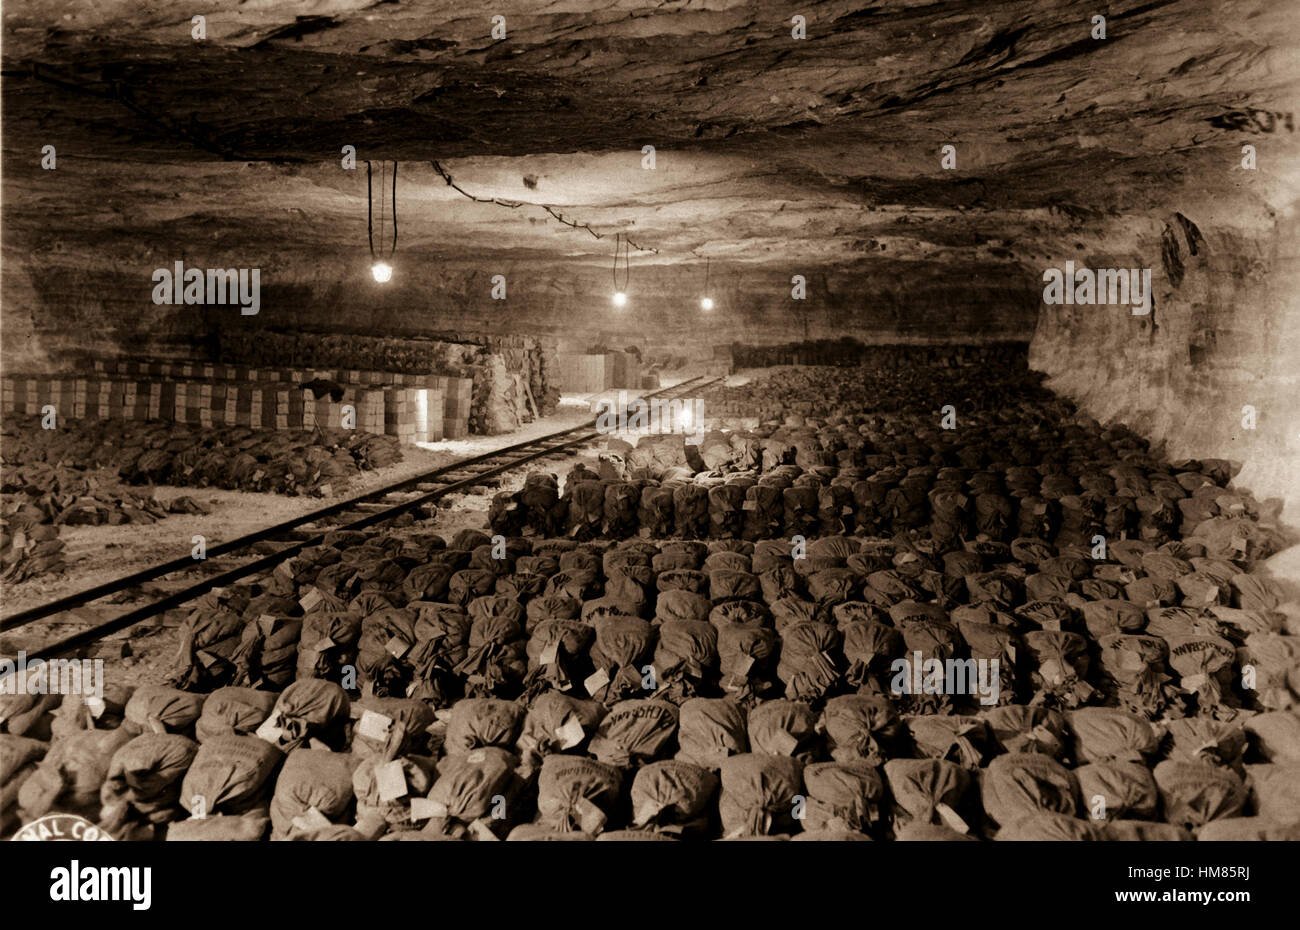 The 90th Division discovered this Reichsbank wealth, SS loot, and Berlin museum paintings that were removed from Berlin to a salt mine in Merkers, Germany.  April 15, 1945.  Cpl. Donald R. Ornitz, USA. (Roberts Commission) NARA FILE #:  239-PA-6-34-2 WAR & CONFLICT BOOK #:  1101 Stock Photo